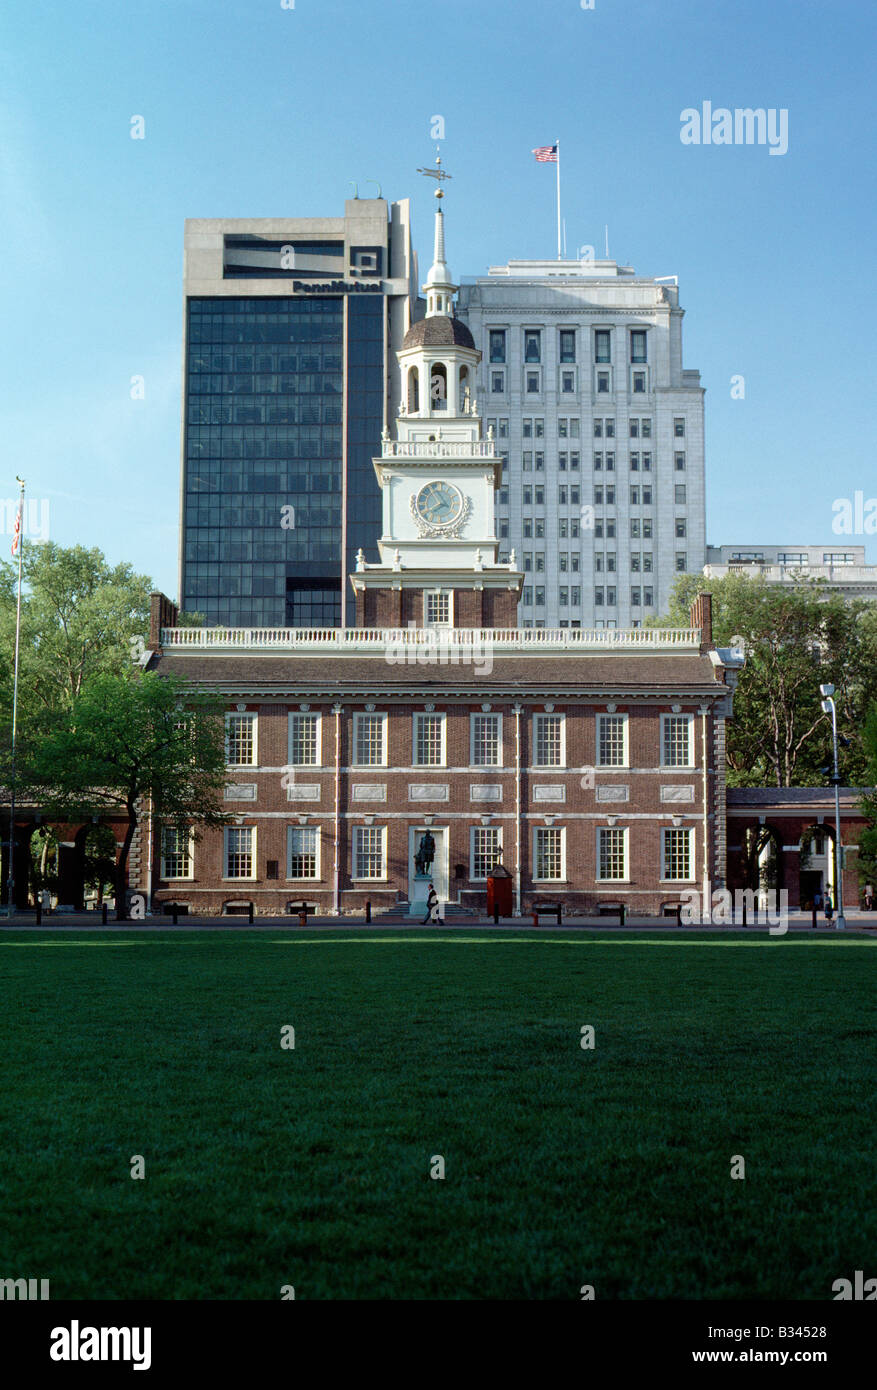 INDEPENDENCE MALL, SITE OF THE SIGNING OF THE DECLARATION OF INDEPENDENCE IN 1776, PHILADELPHIA, PENNSYLVANIA, USA Stock Photo